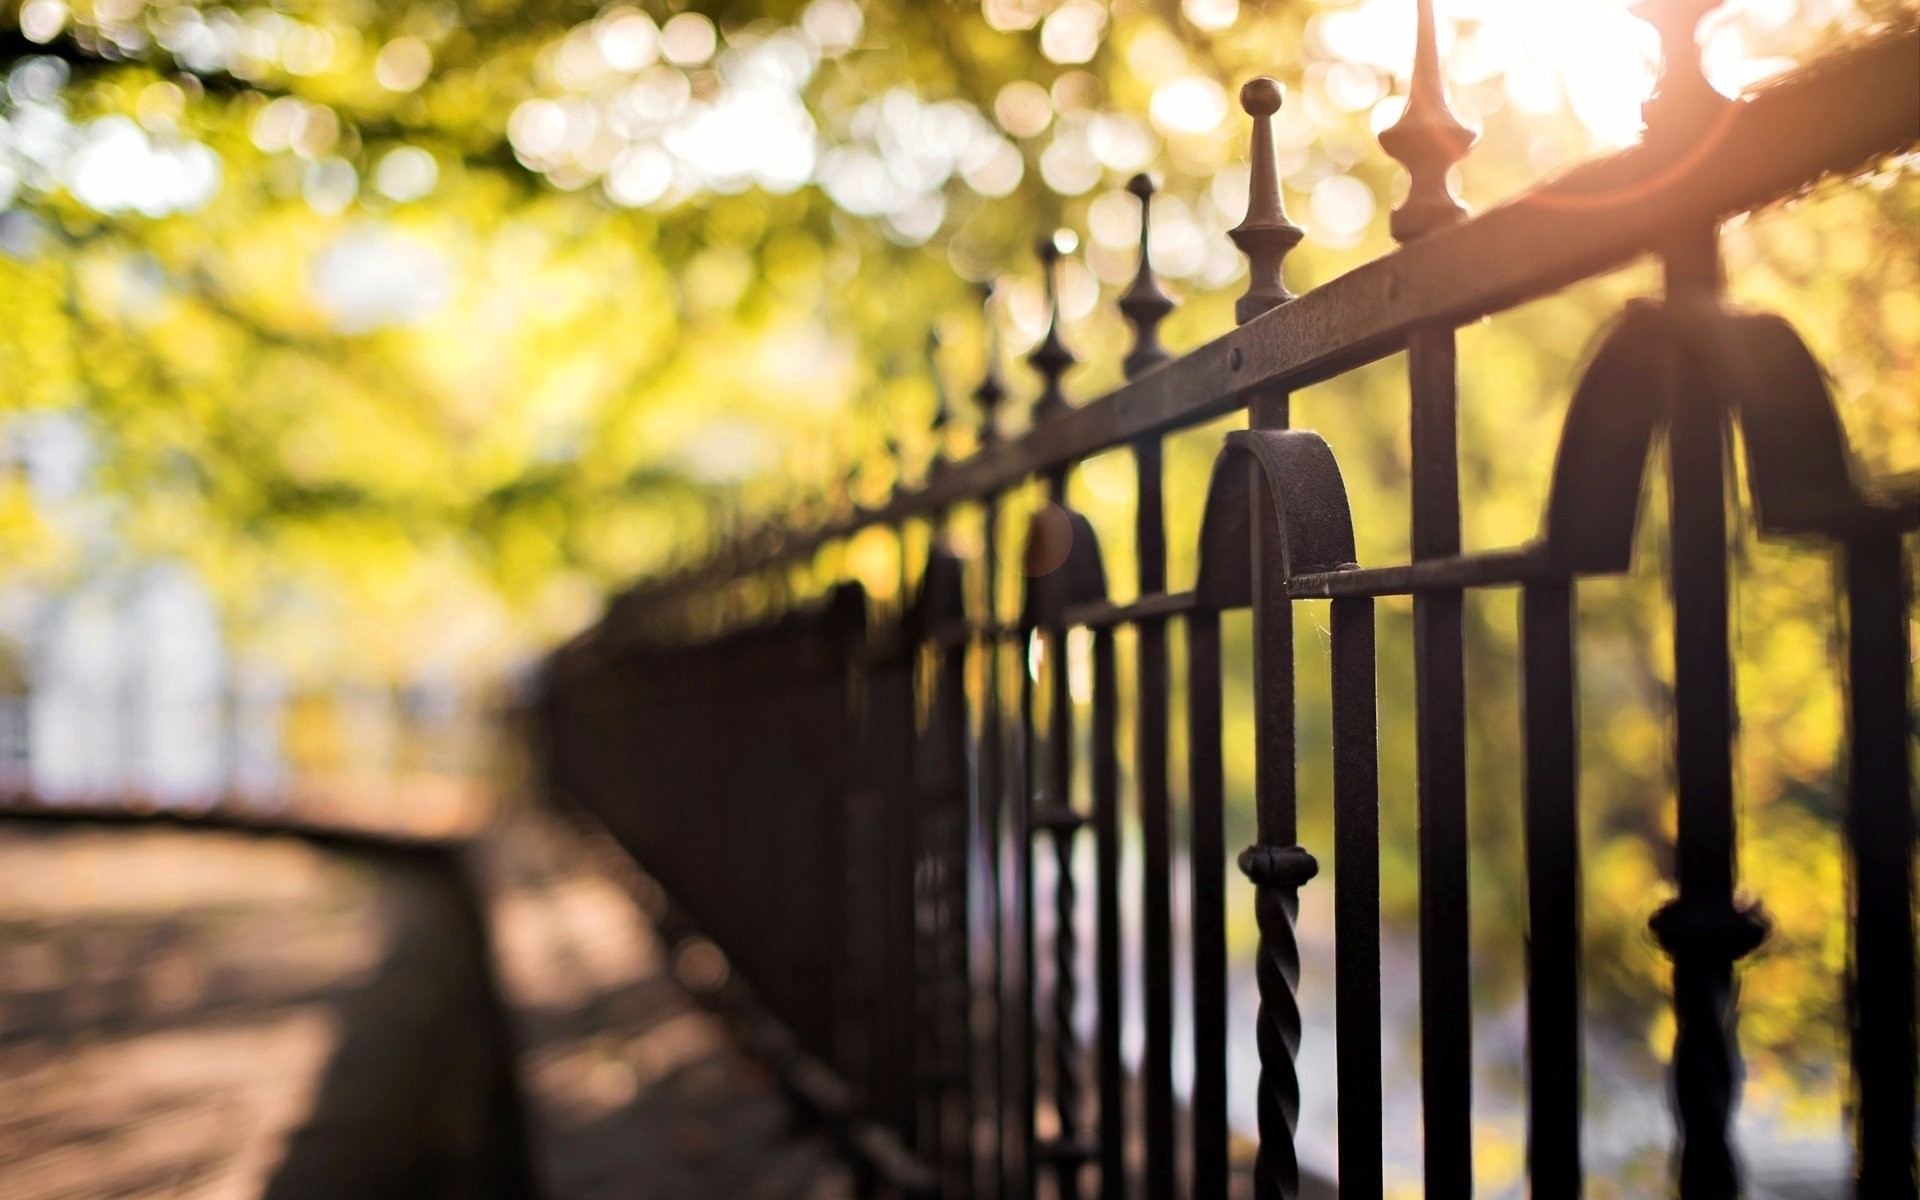 nature, Photography, Macro, Sunlight, Fence, Leaves, Blurred, Road, Bokeh, Lights Wallpaper